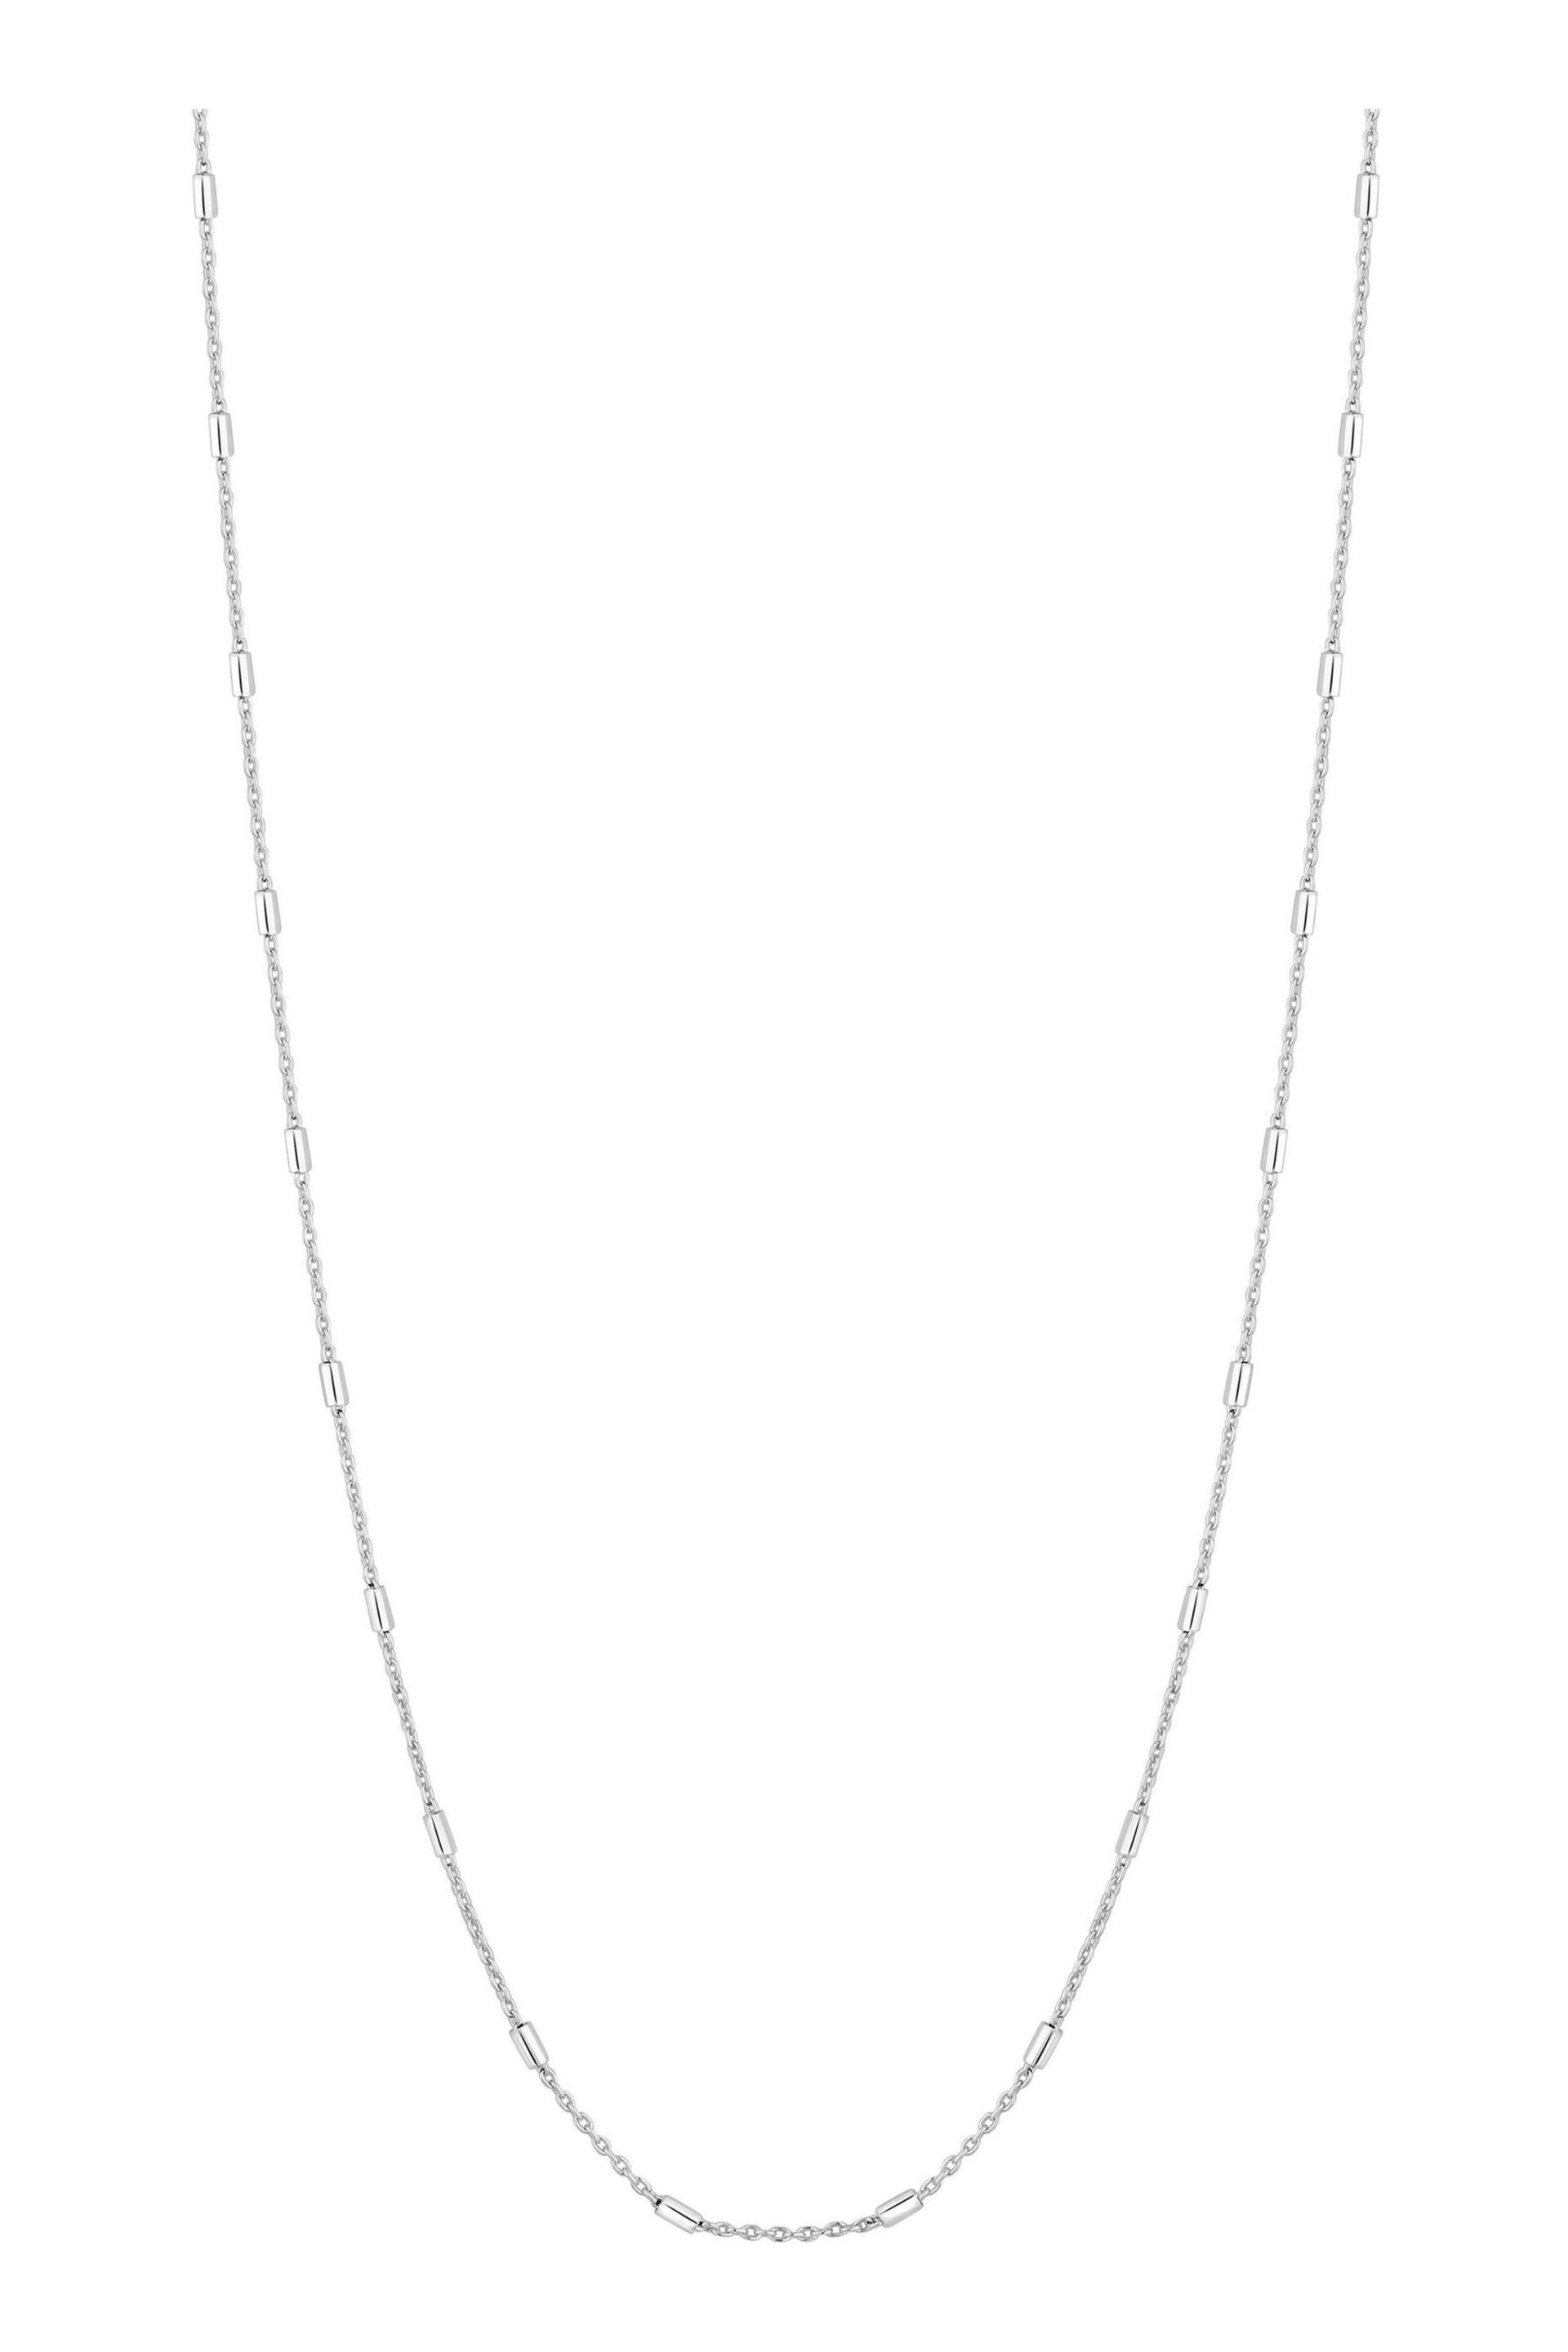 Simply Silver Sterling Silver Fine Station Necklace - Image 1 of 2